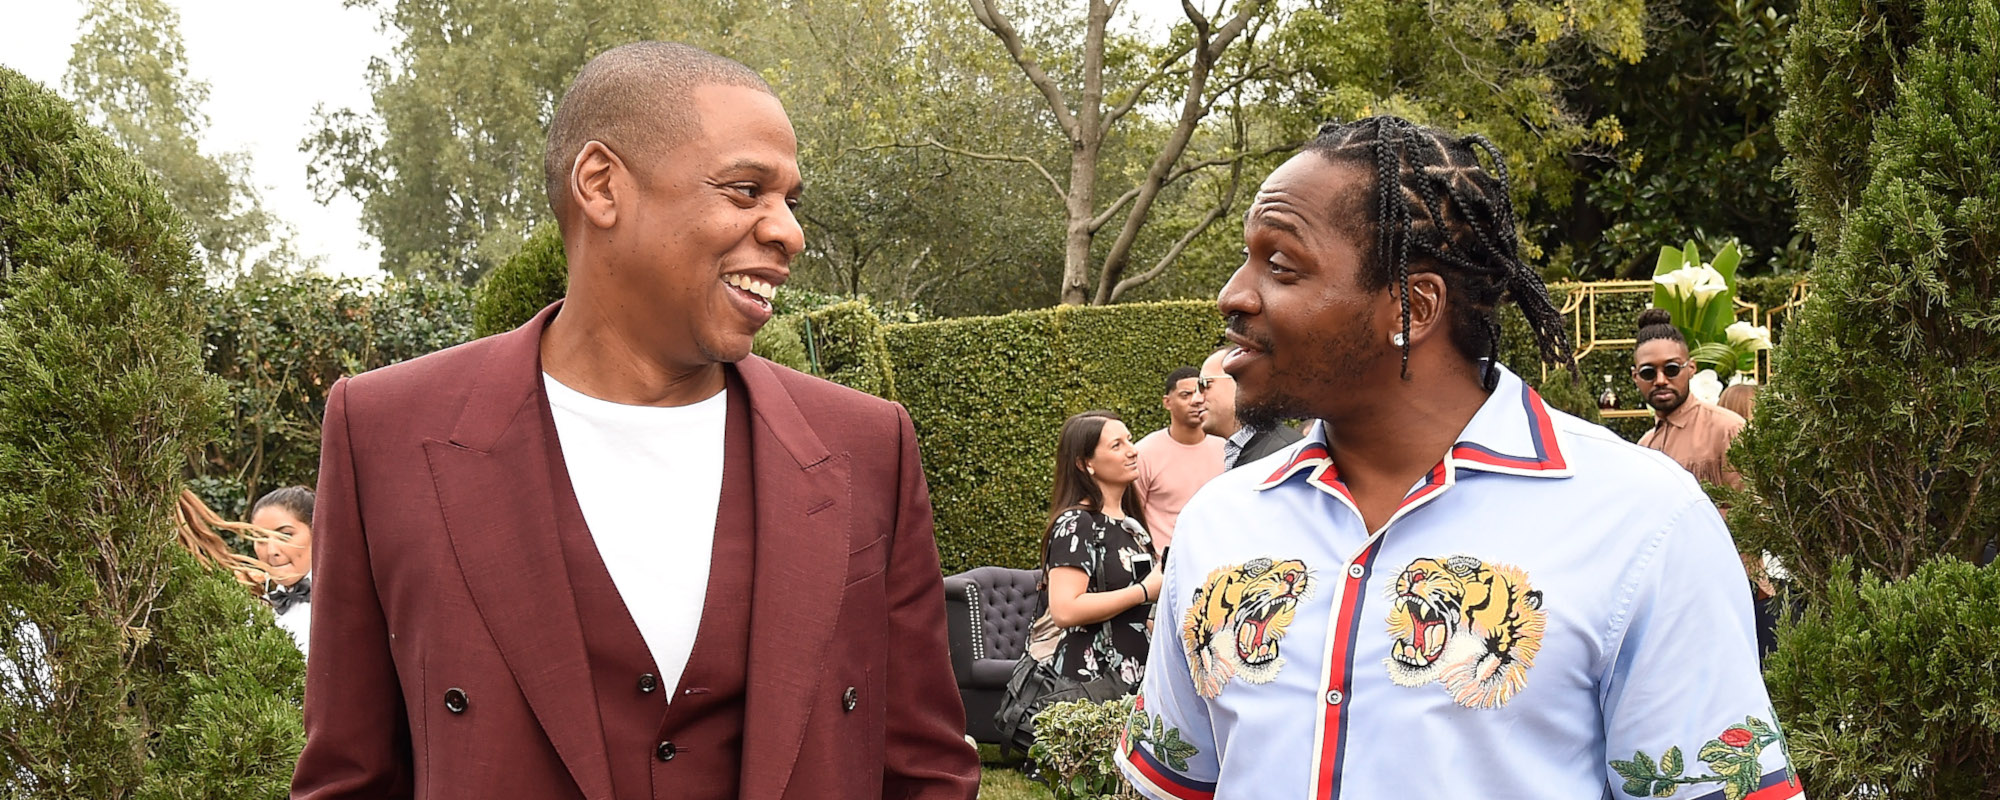 Pusha T & Jay-Z’s New Song “Neck & Wrist” Flexes the Luxurious Life, Produced by Pharrell